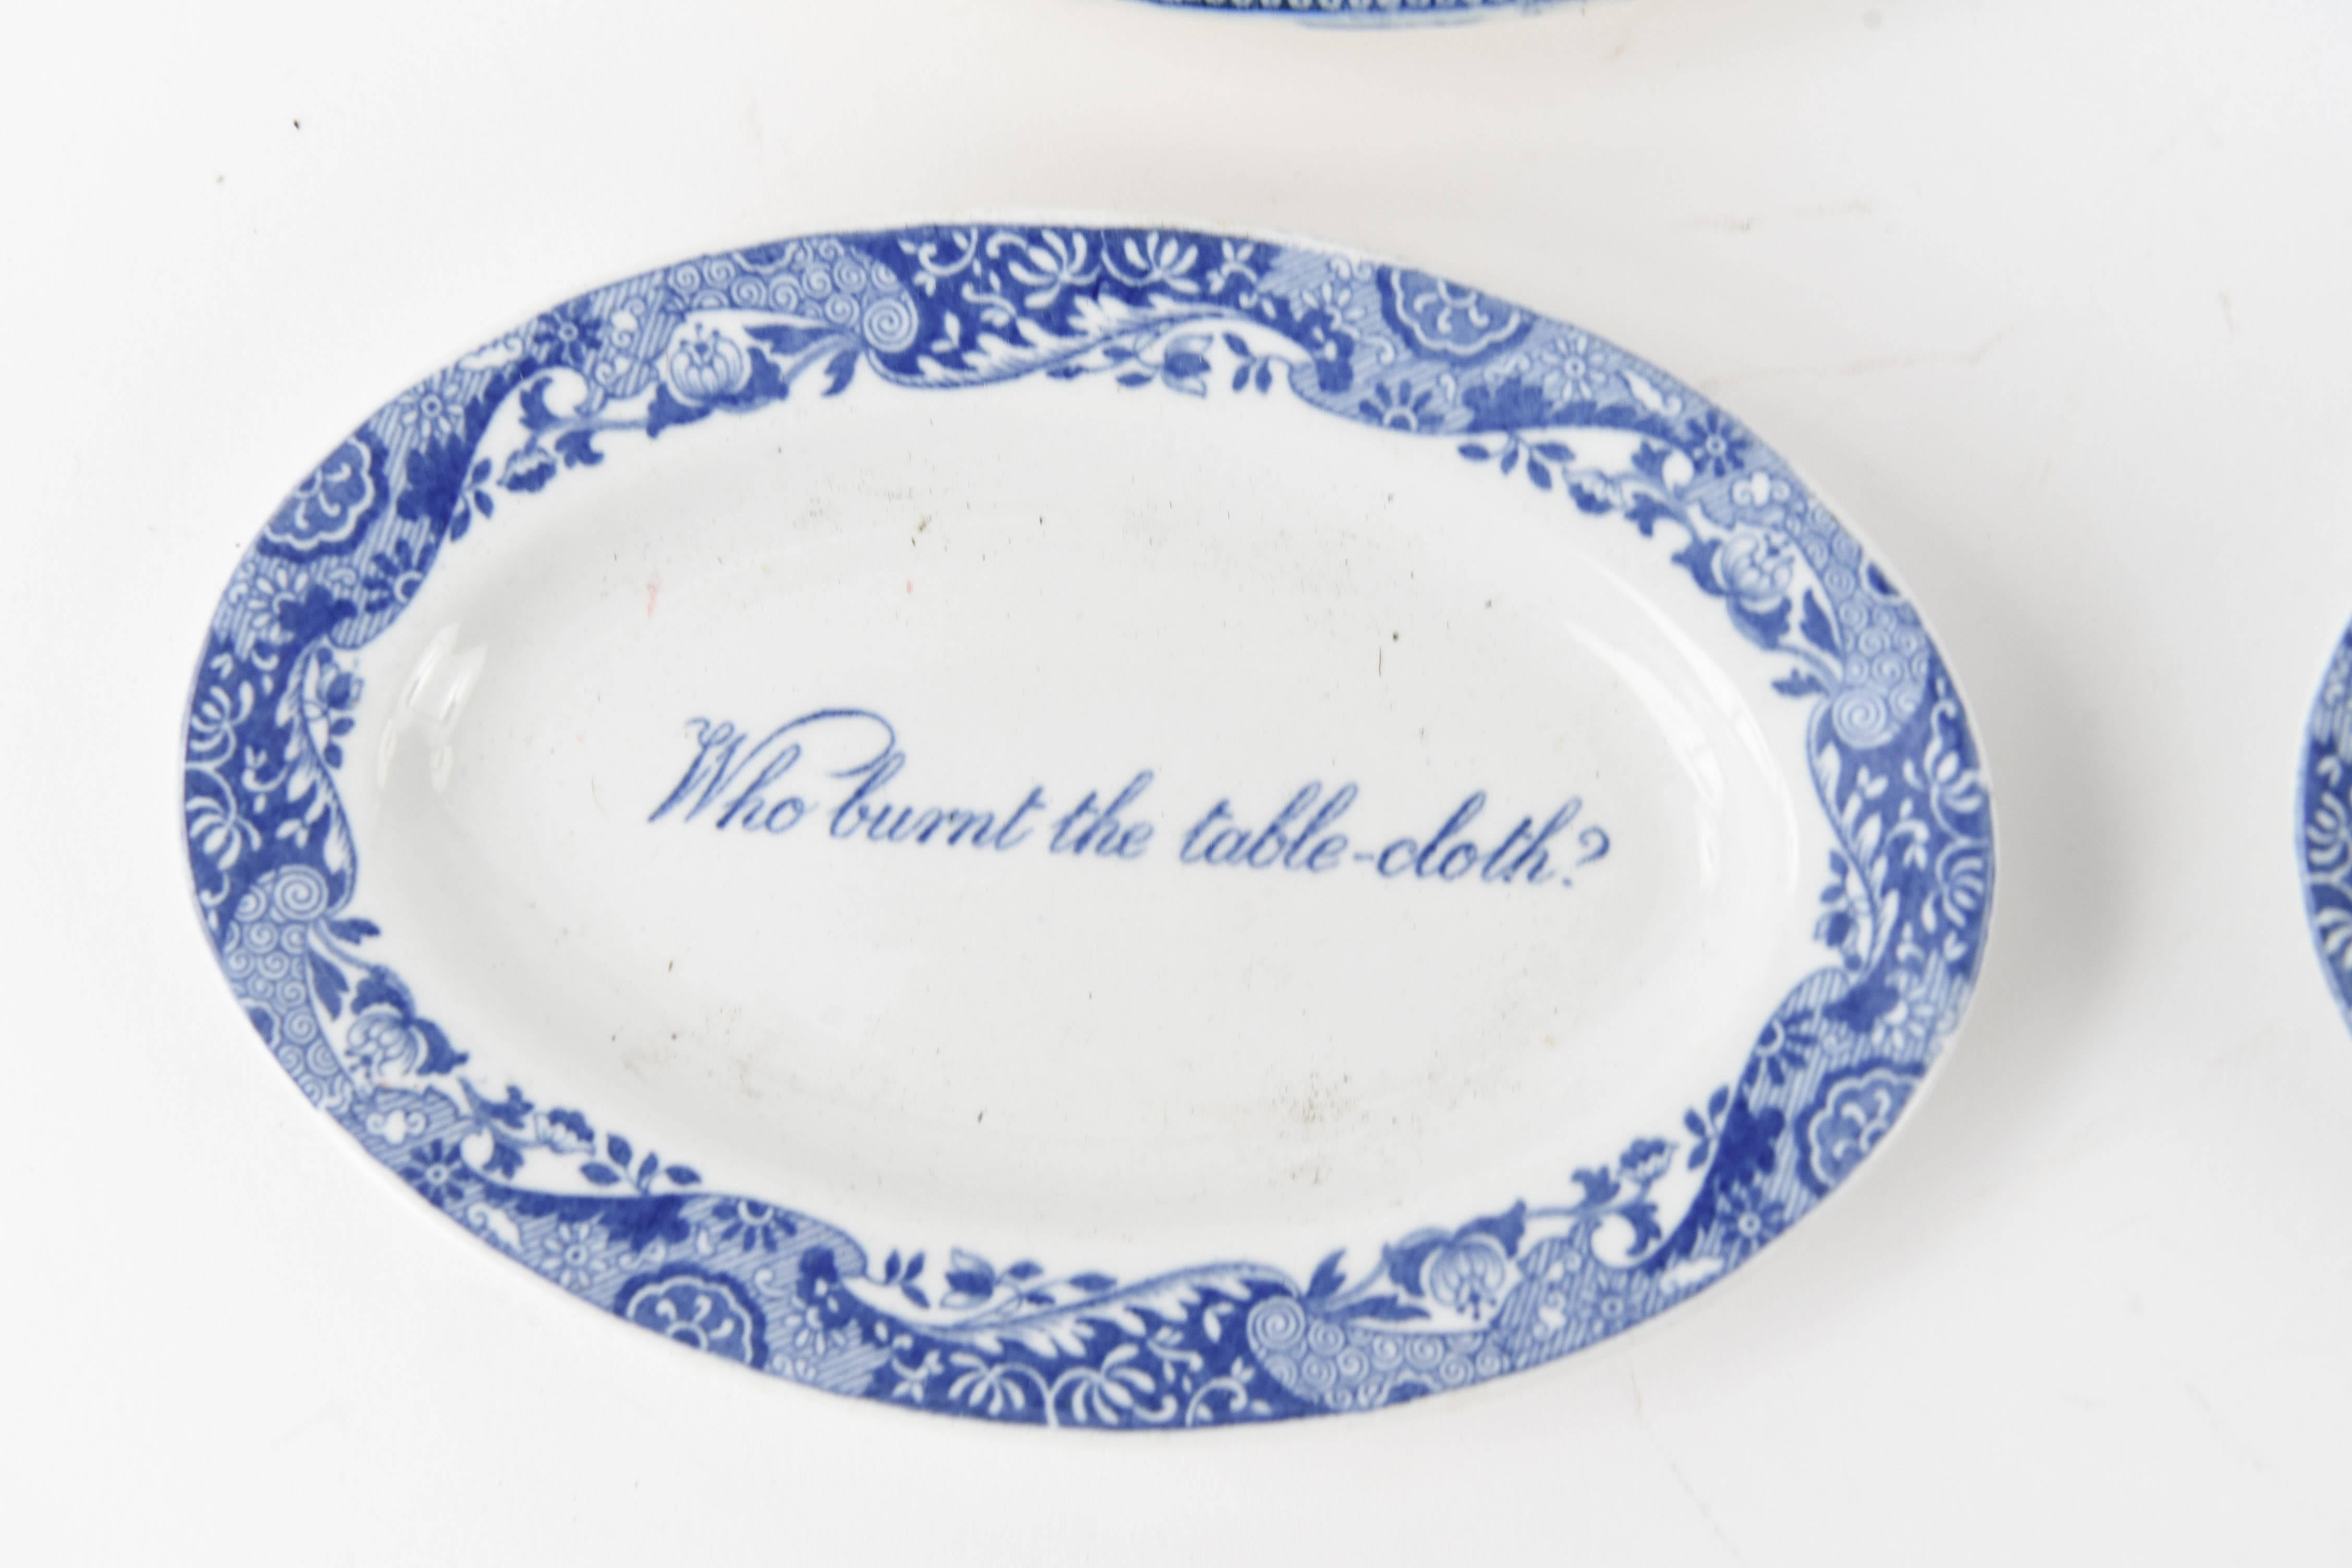 A set of three Spode Italian blue transfer ware miniature dishes depicting the humorous phrase 